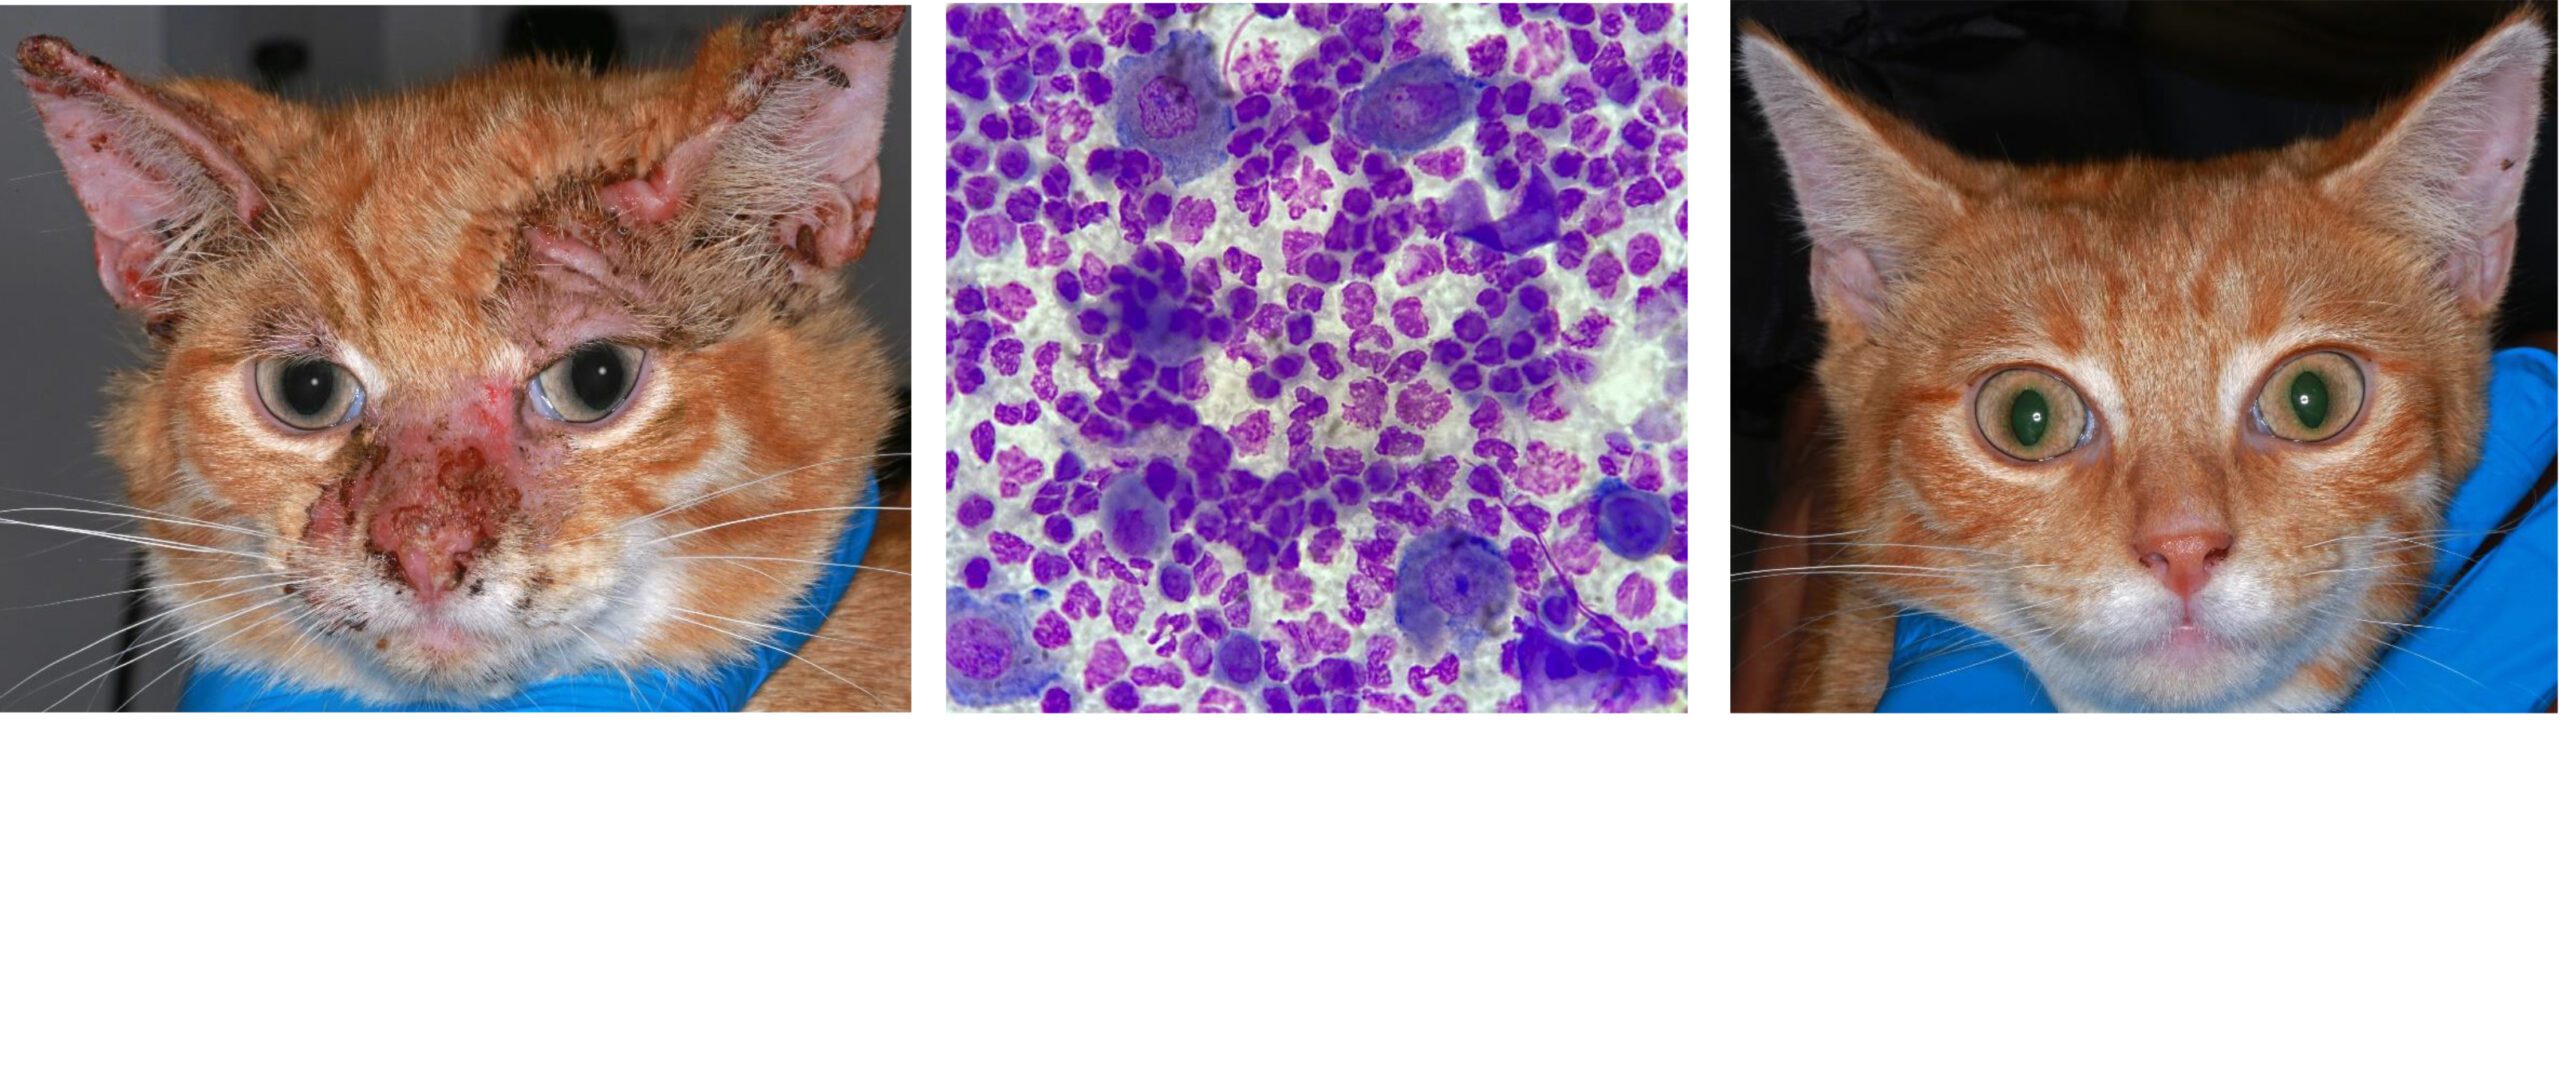 Feline Pemphigus Foliaceus (onset at 3 months' old): first presentation, suggestive immediate cytology, response after only 4 weeks of treatment